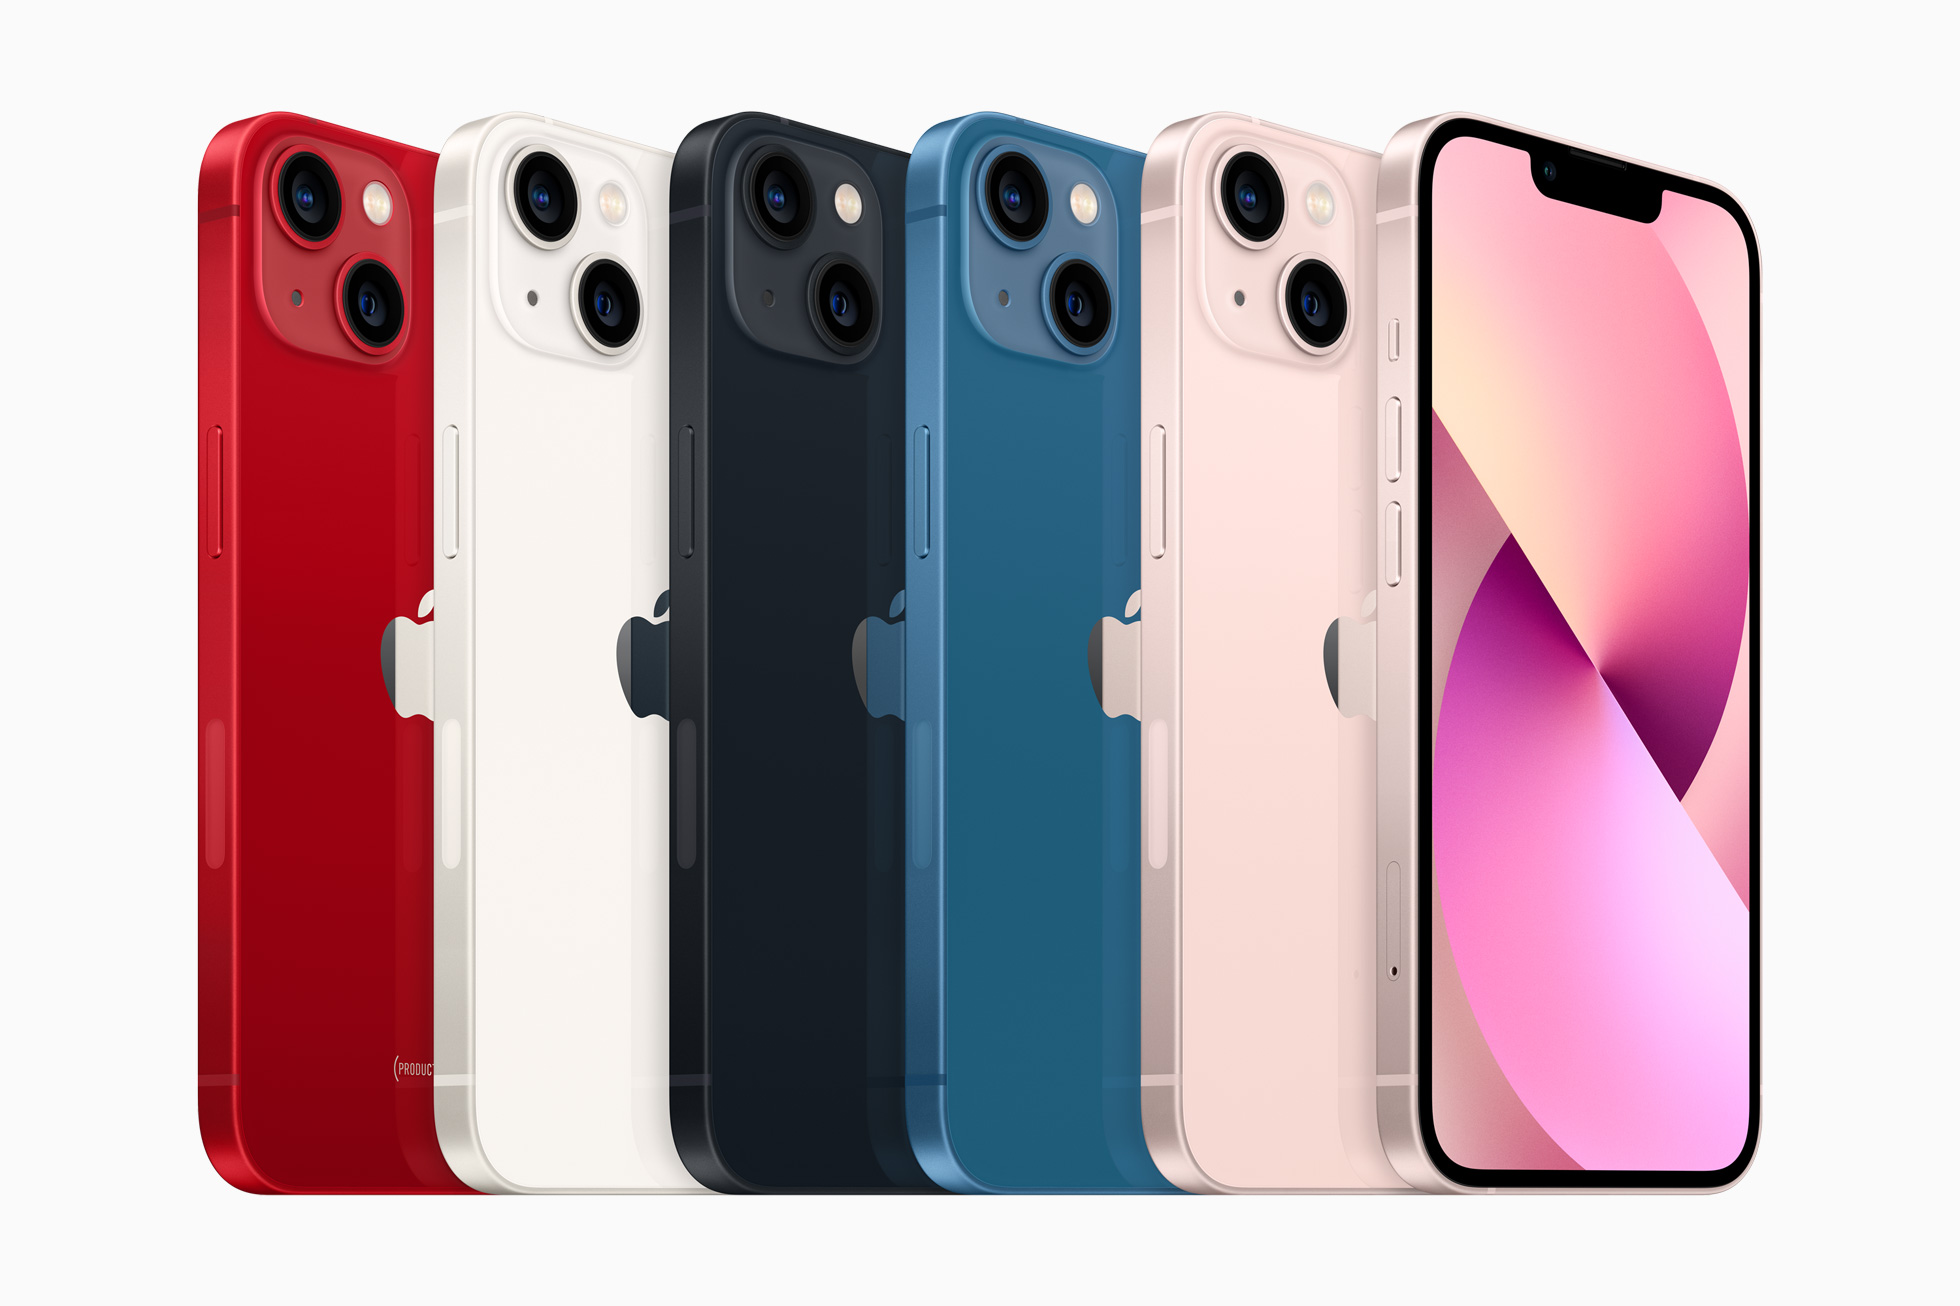 iPhone 13 Mini and iPhone 13: Reduced notch, A15 Bionic, optical stabilization cameraa and increased battery life, at $700